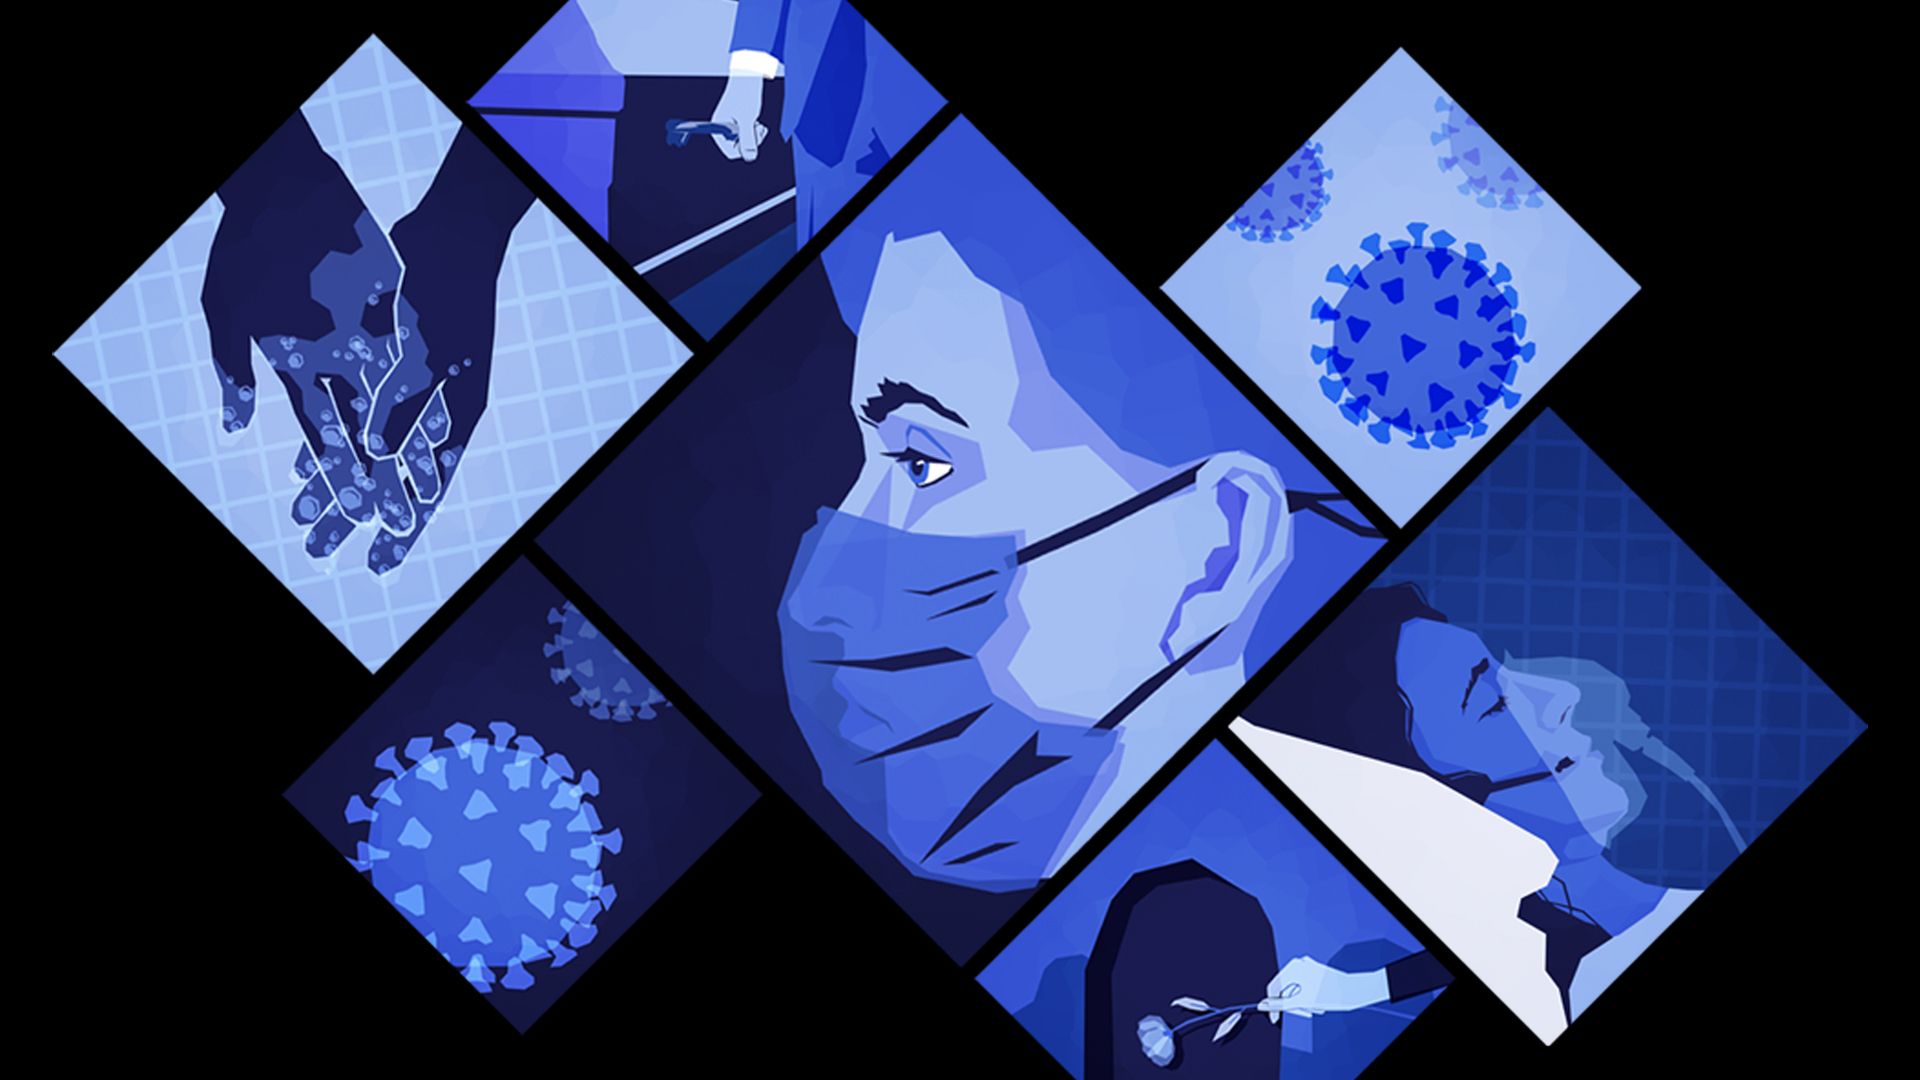 A collage of vignettes depicting scenes of life during the pandemic, including a person wearing a mask, washing their hands, and a gravestone.